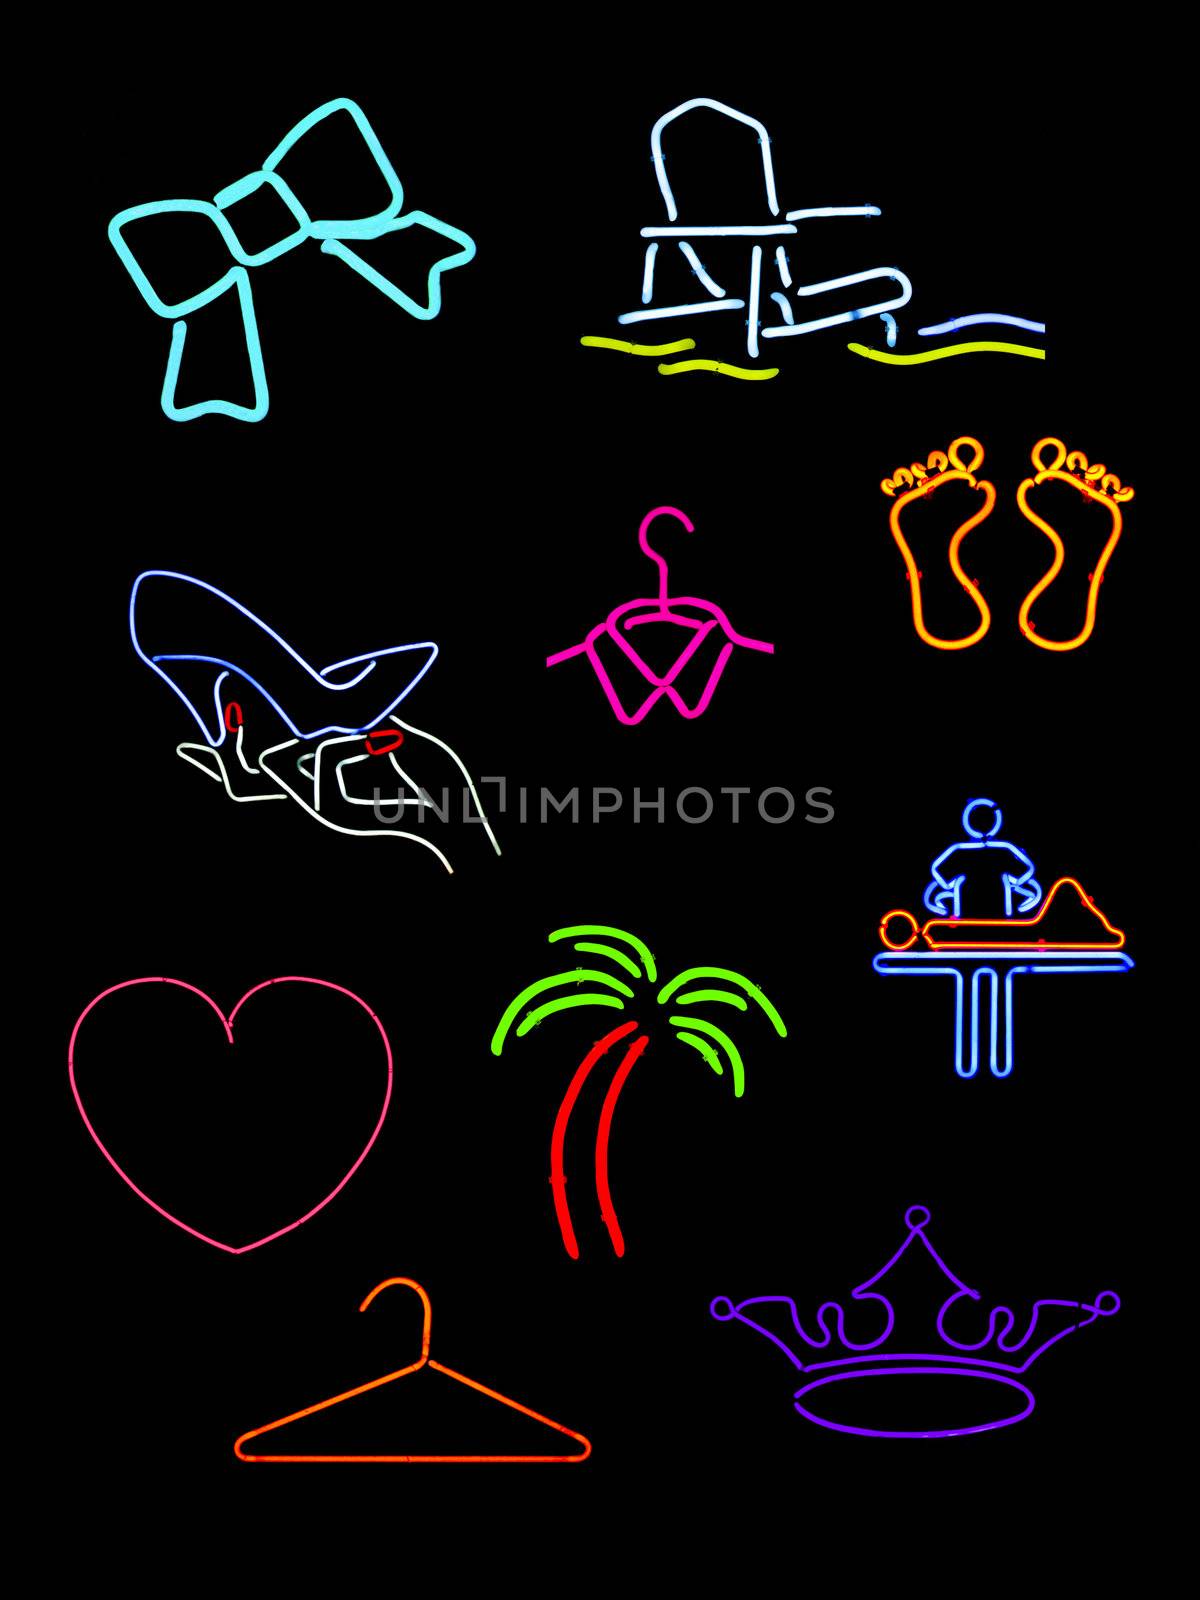 Several different neon shapes and signs